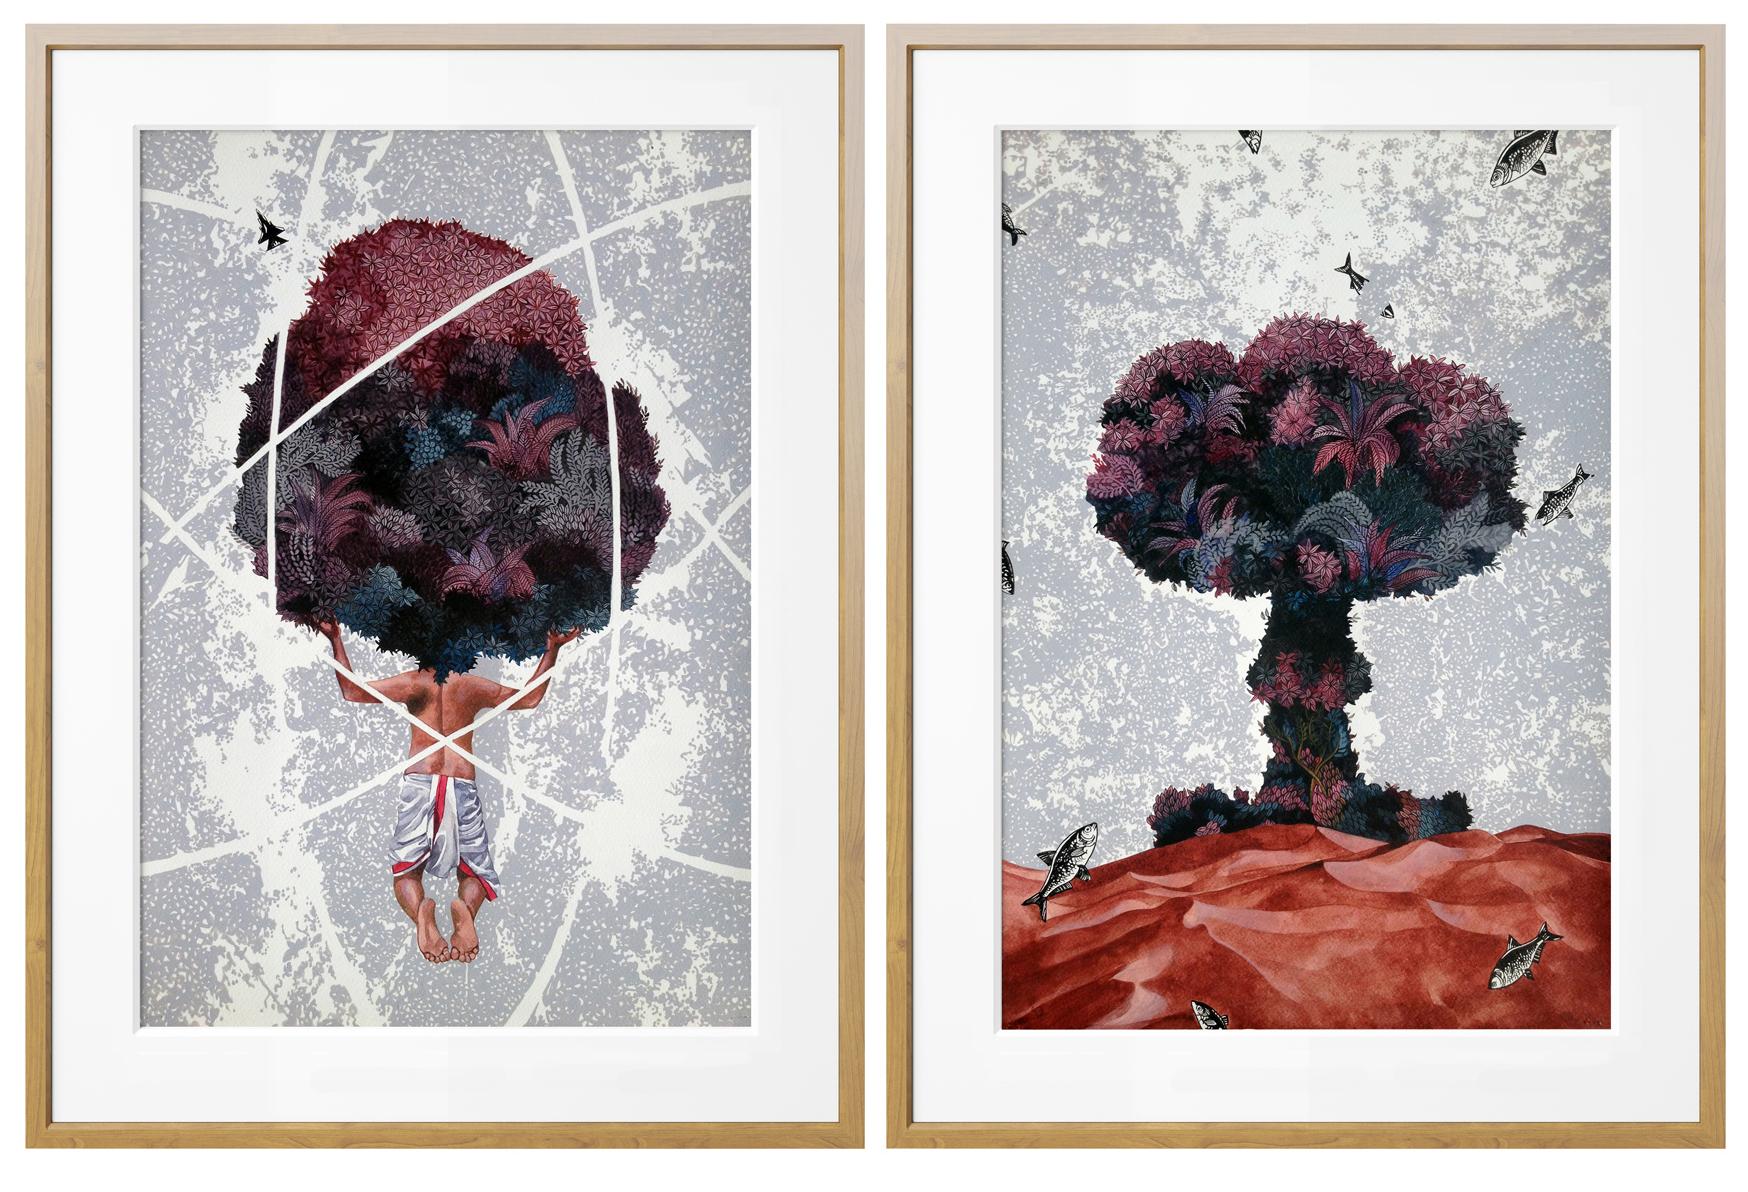 Binay Sinha Landscape Painting - Alarming Willingness - Incredible Figurative Landscape Diptych in Grey + Wine